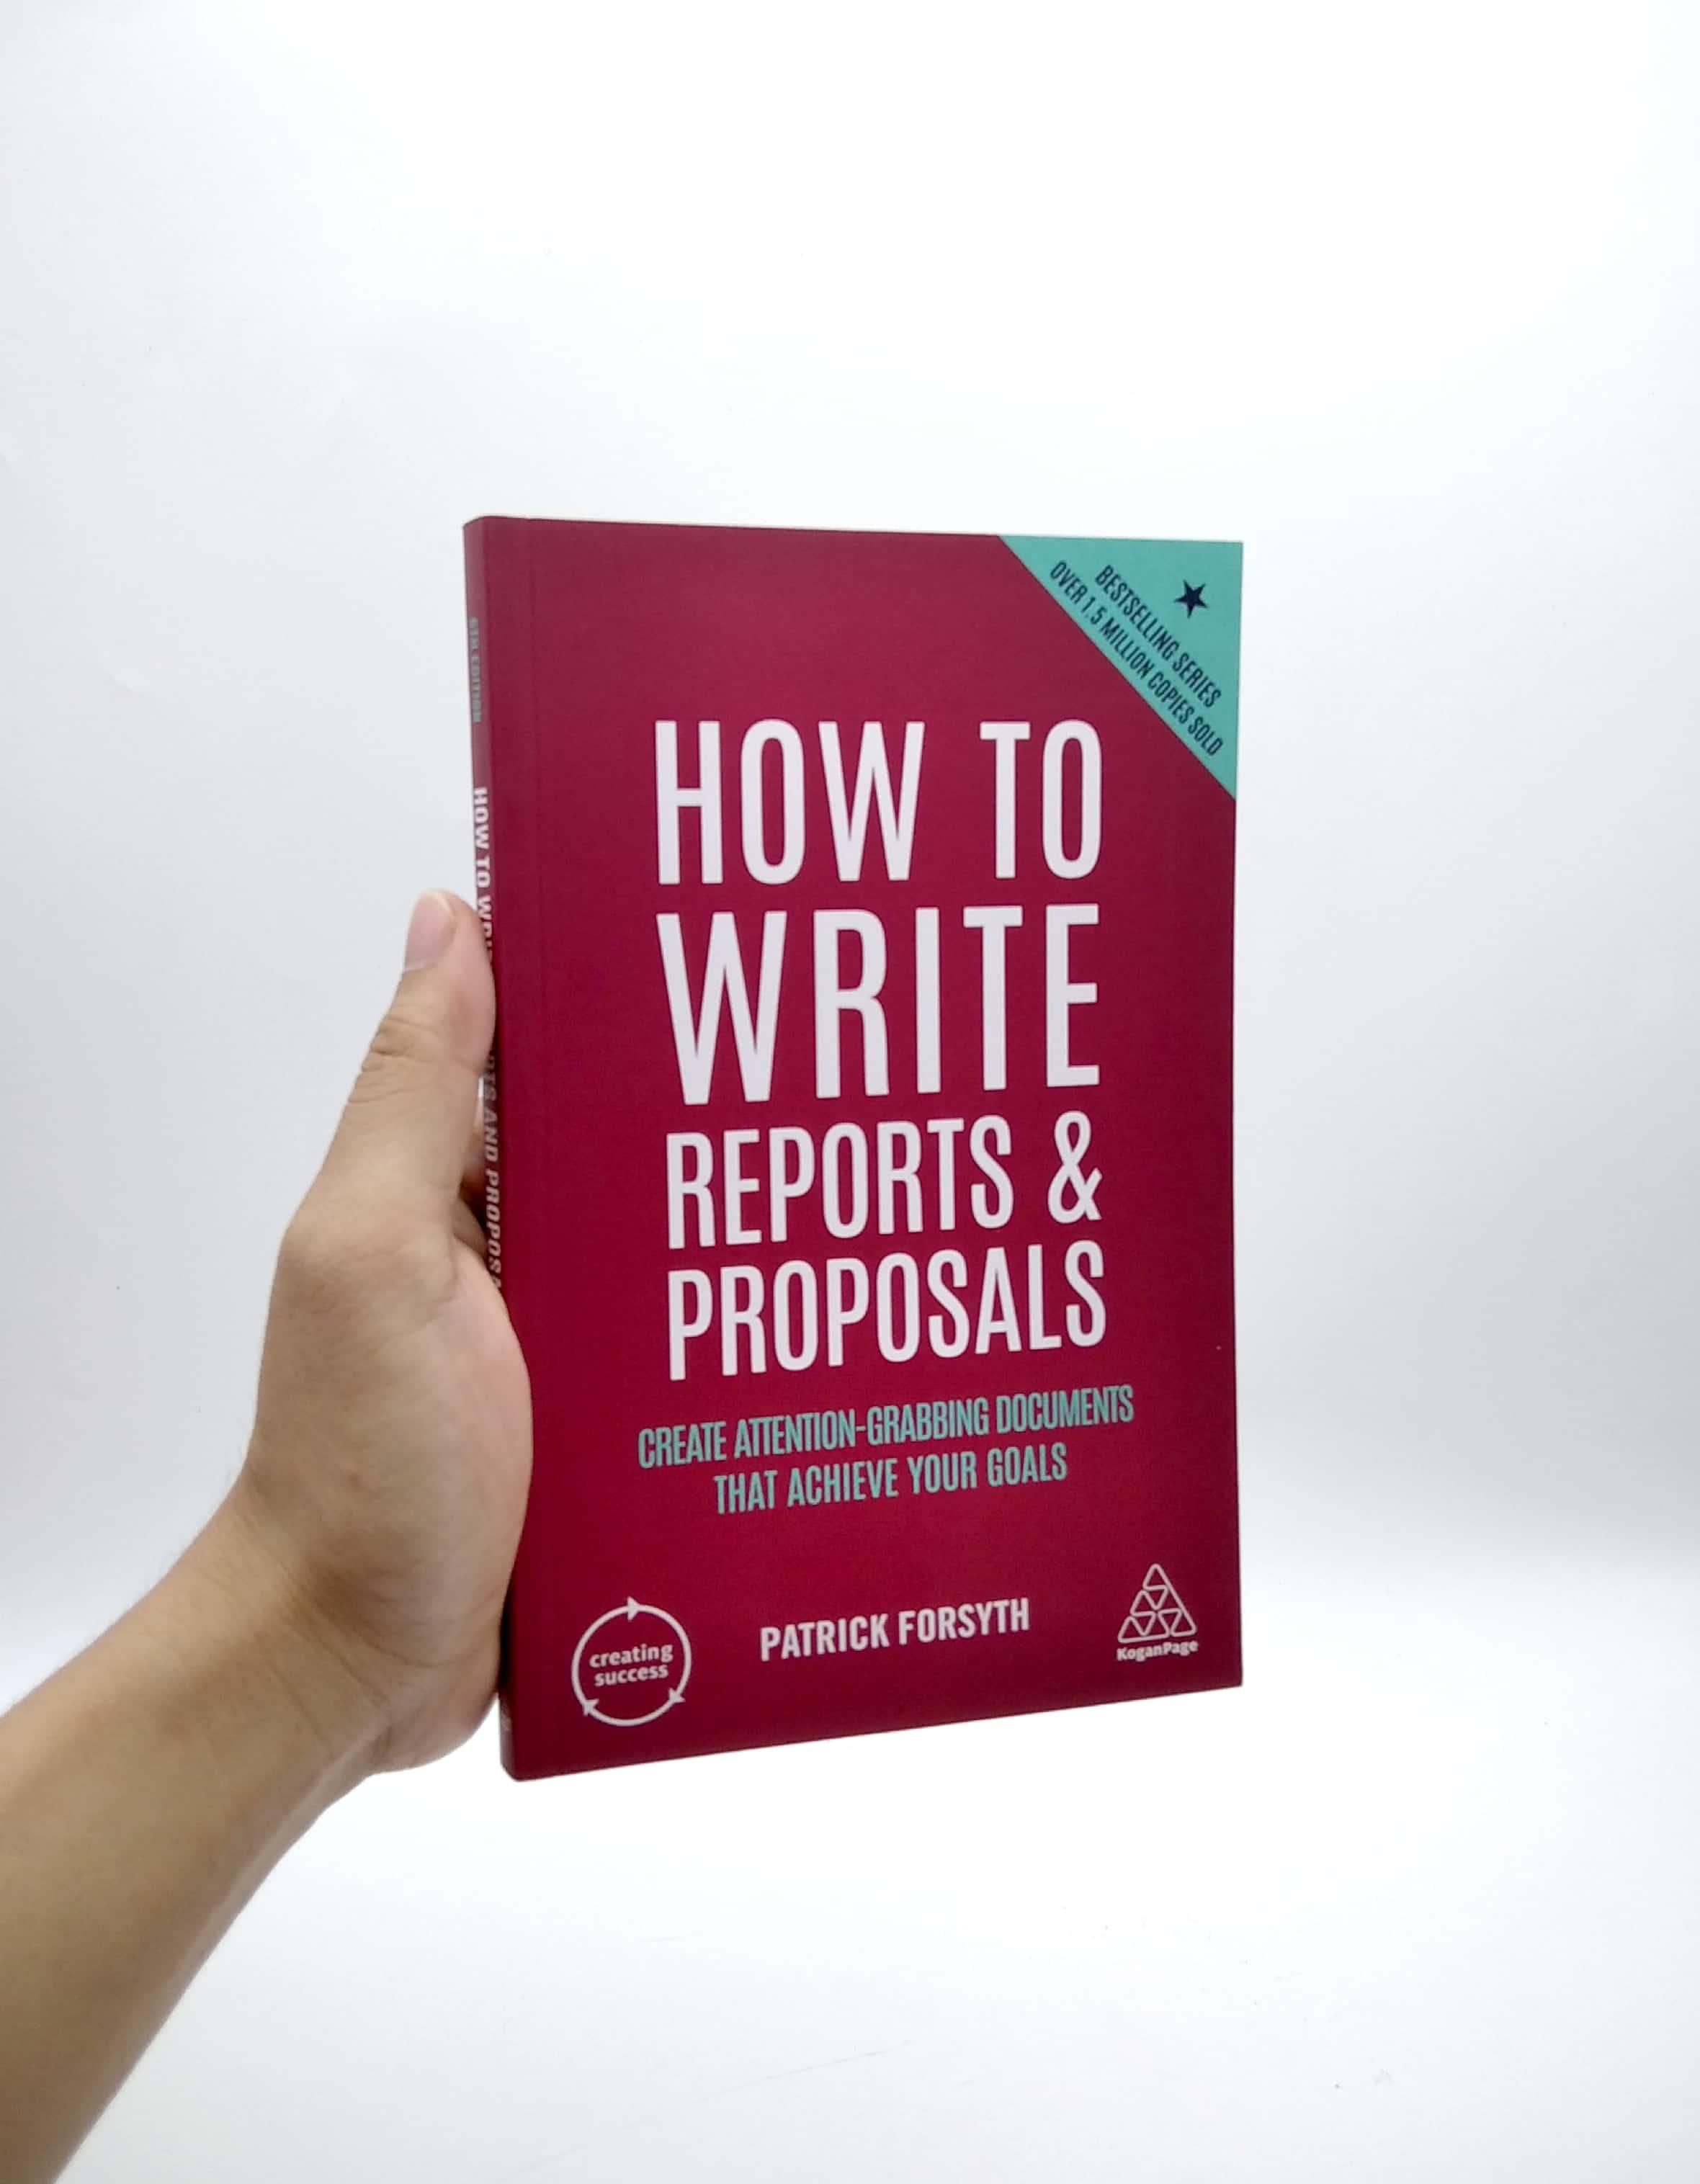 How To Write Reports And Proposals: Create Attention-Grabbing Documents That Achieve Your Goals